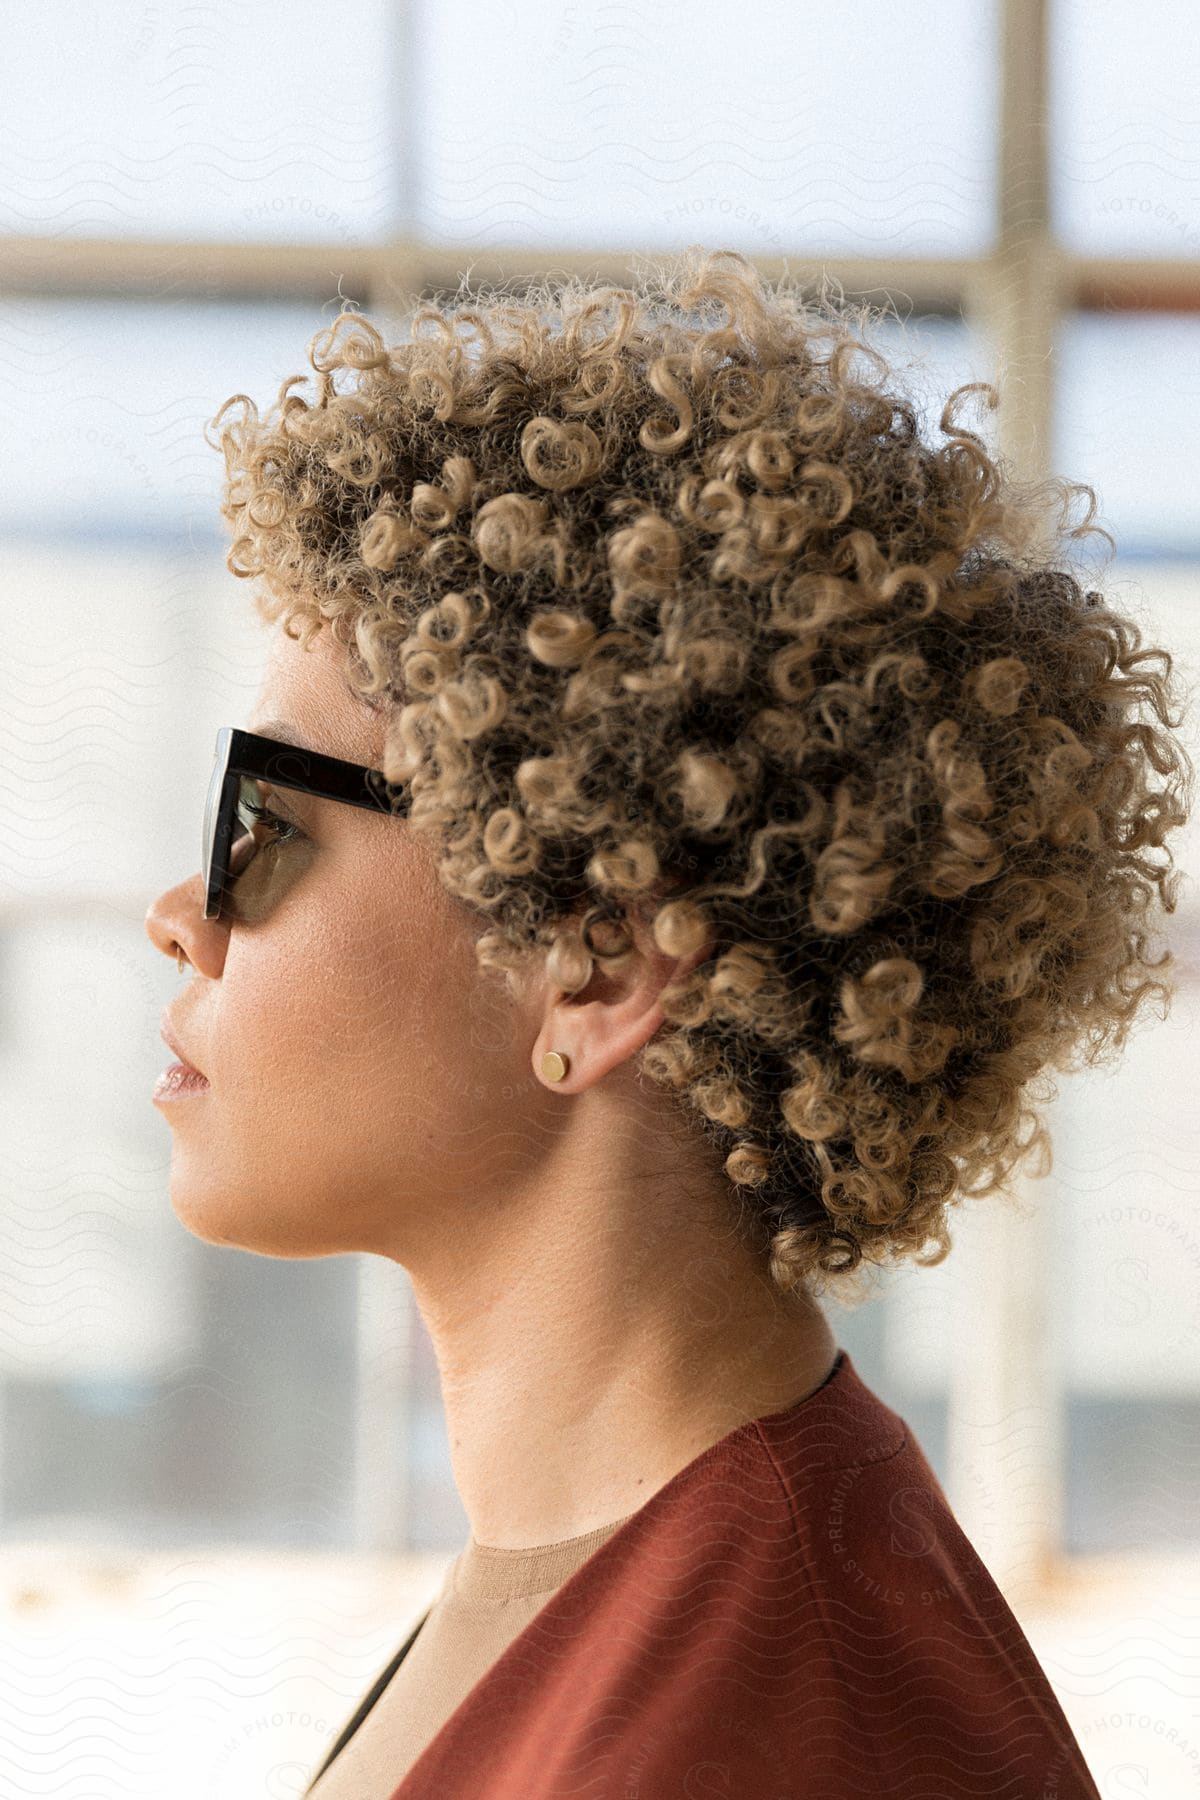 A biracial woman with curly blonde hair poses while wearing sunglasses.